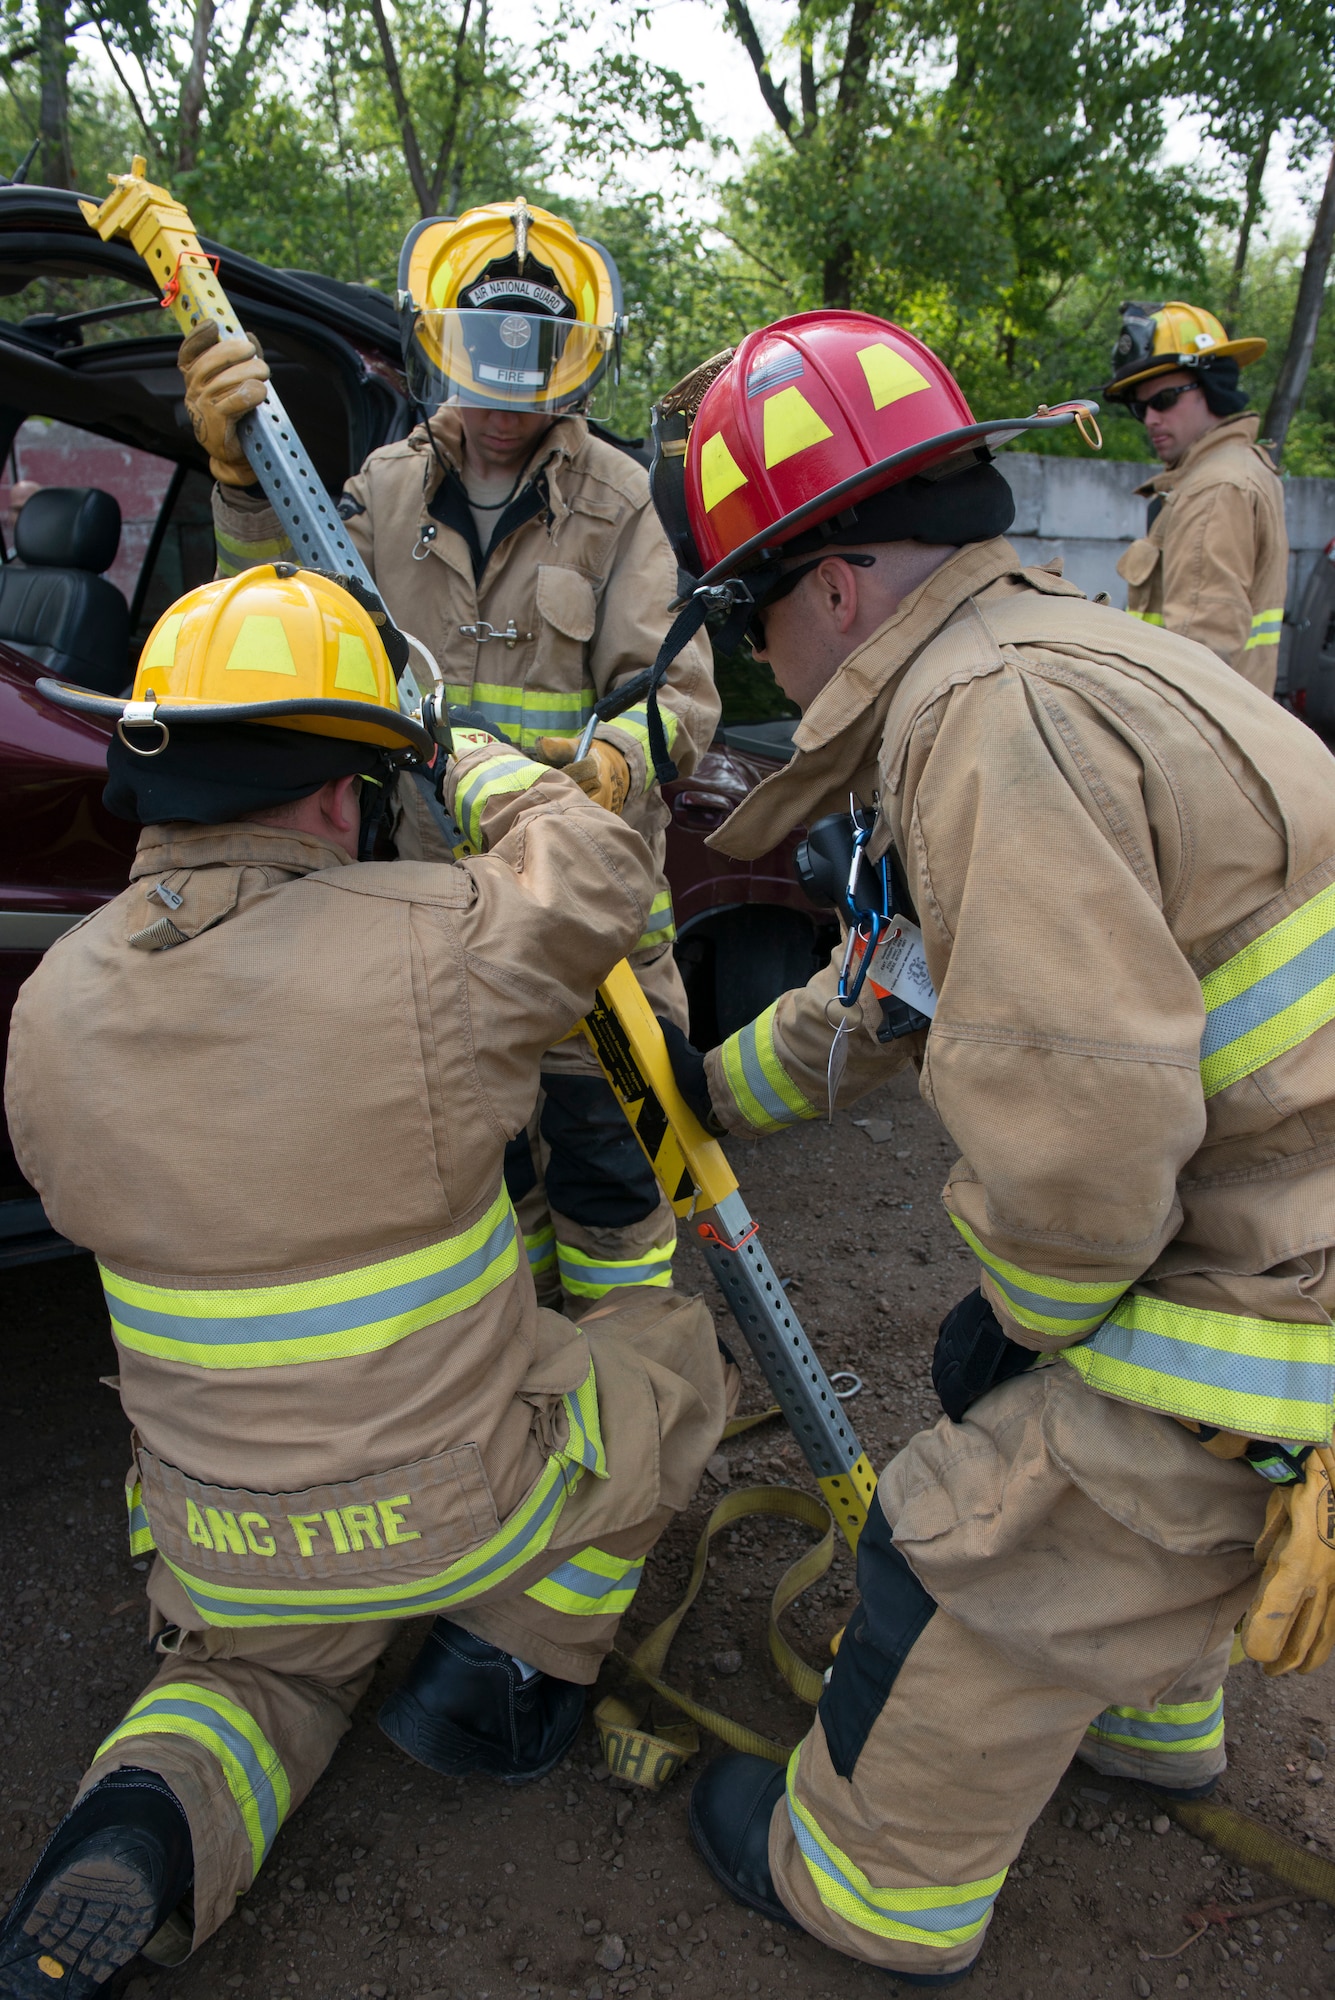 Firefighters assigned to the 103rd Civil Engineer Squadron, Connecticut Air National Guard attempt to remove a vehicle off of another vehicle as part of an auto accident scenario during a rescue strike team exercise, June 1, 2019 in East Granby, Conn. The firefighters trained with members of several local fire departments to ensure continuity in training across departments. (U.S. Air National Guard photo by Tech. Sgt. Tamara R. Dabney)